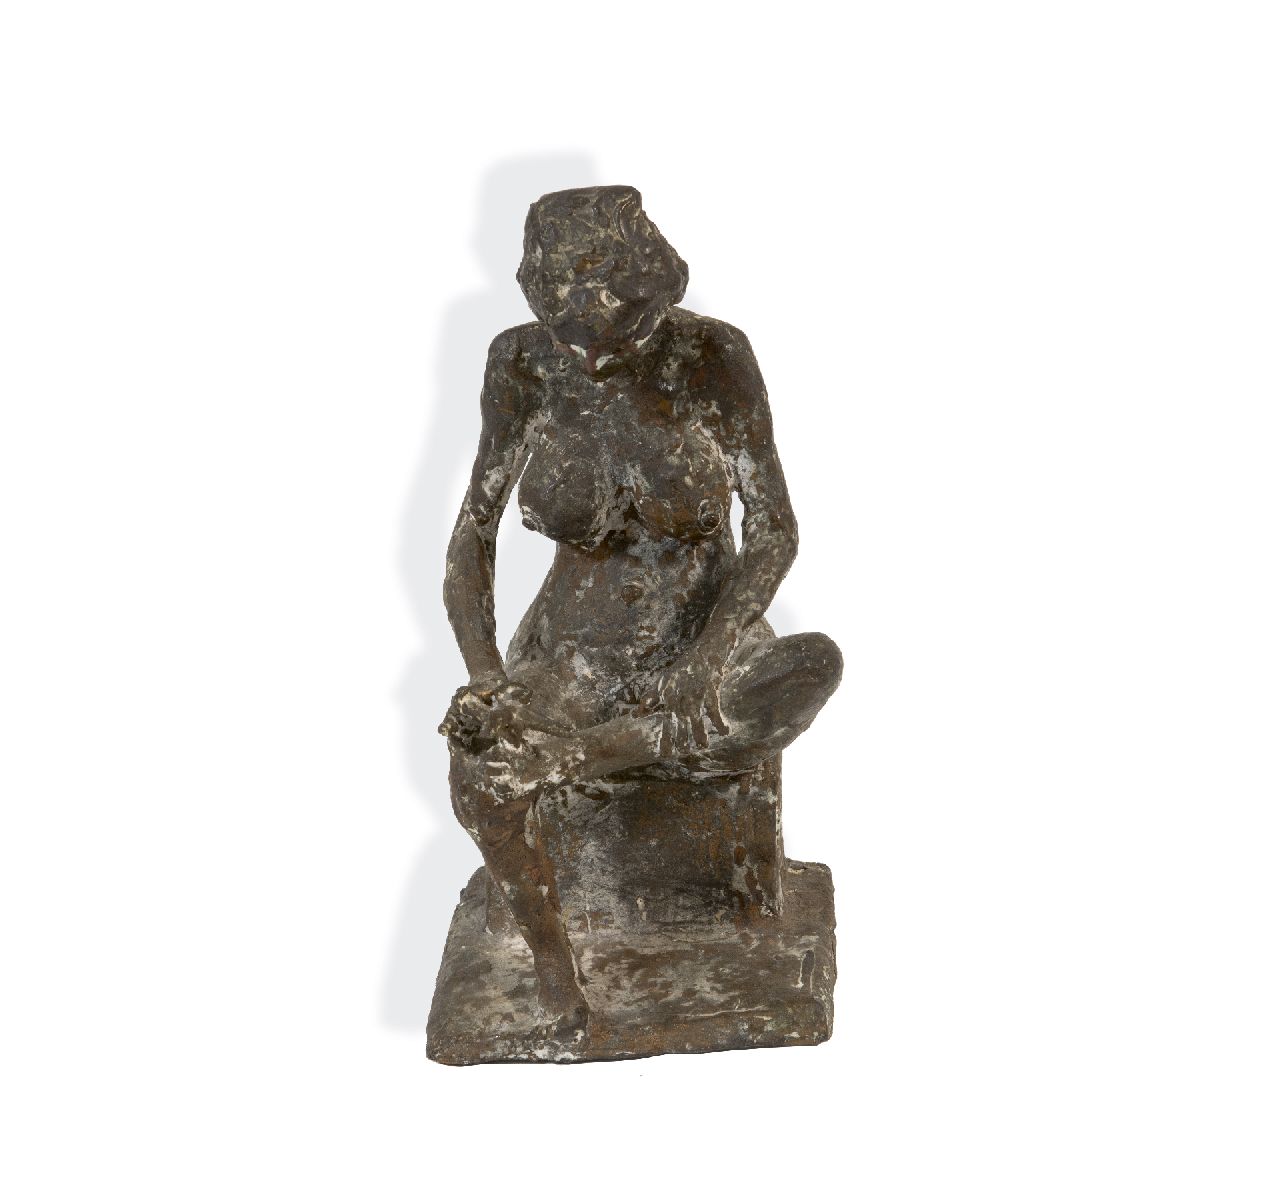 Kleinhans B.  | Bernhard Kleinhans, Female nude, cutting nailes, bronze 28.0 x 13.4 cm, signed on the side of the seat and dated 1951